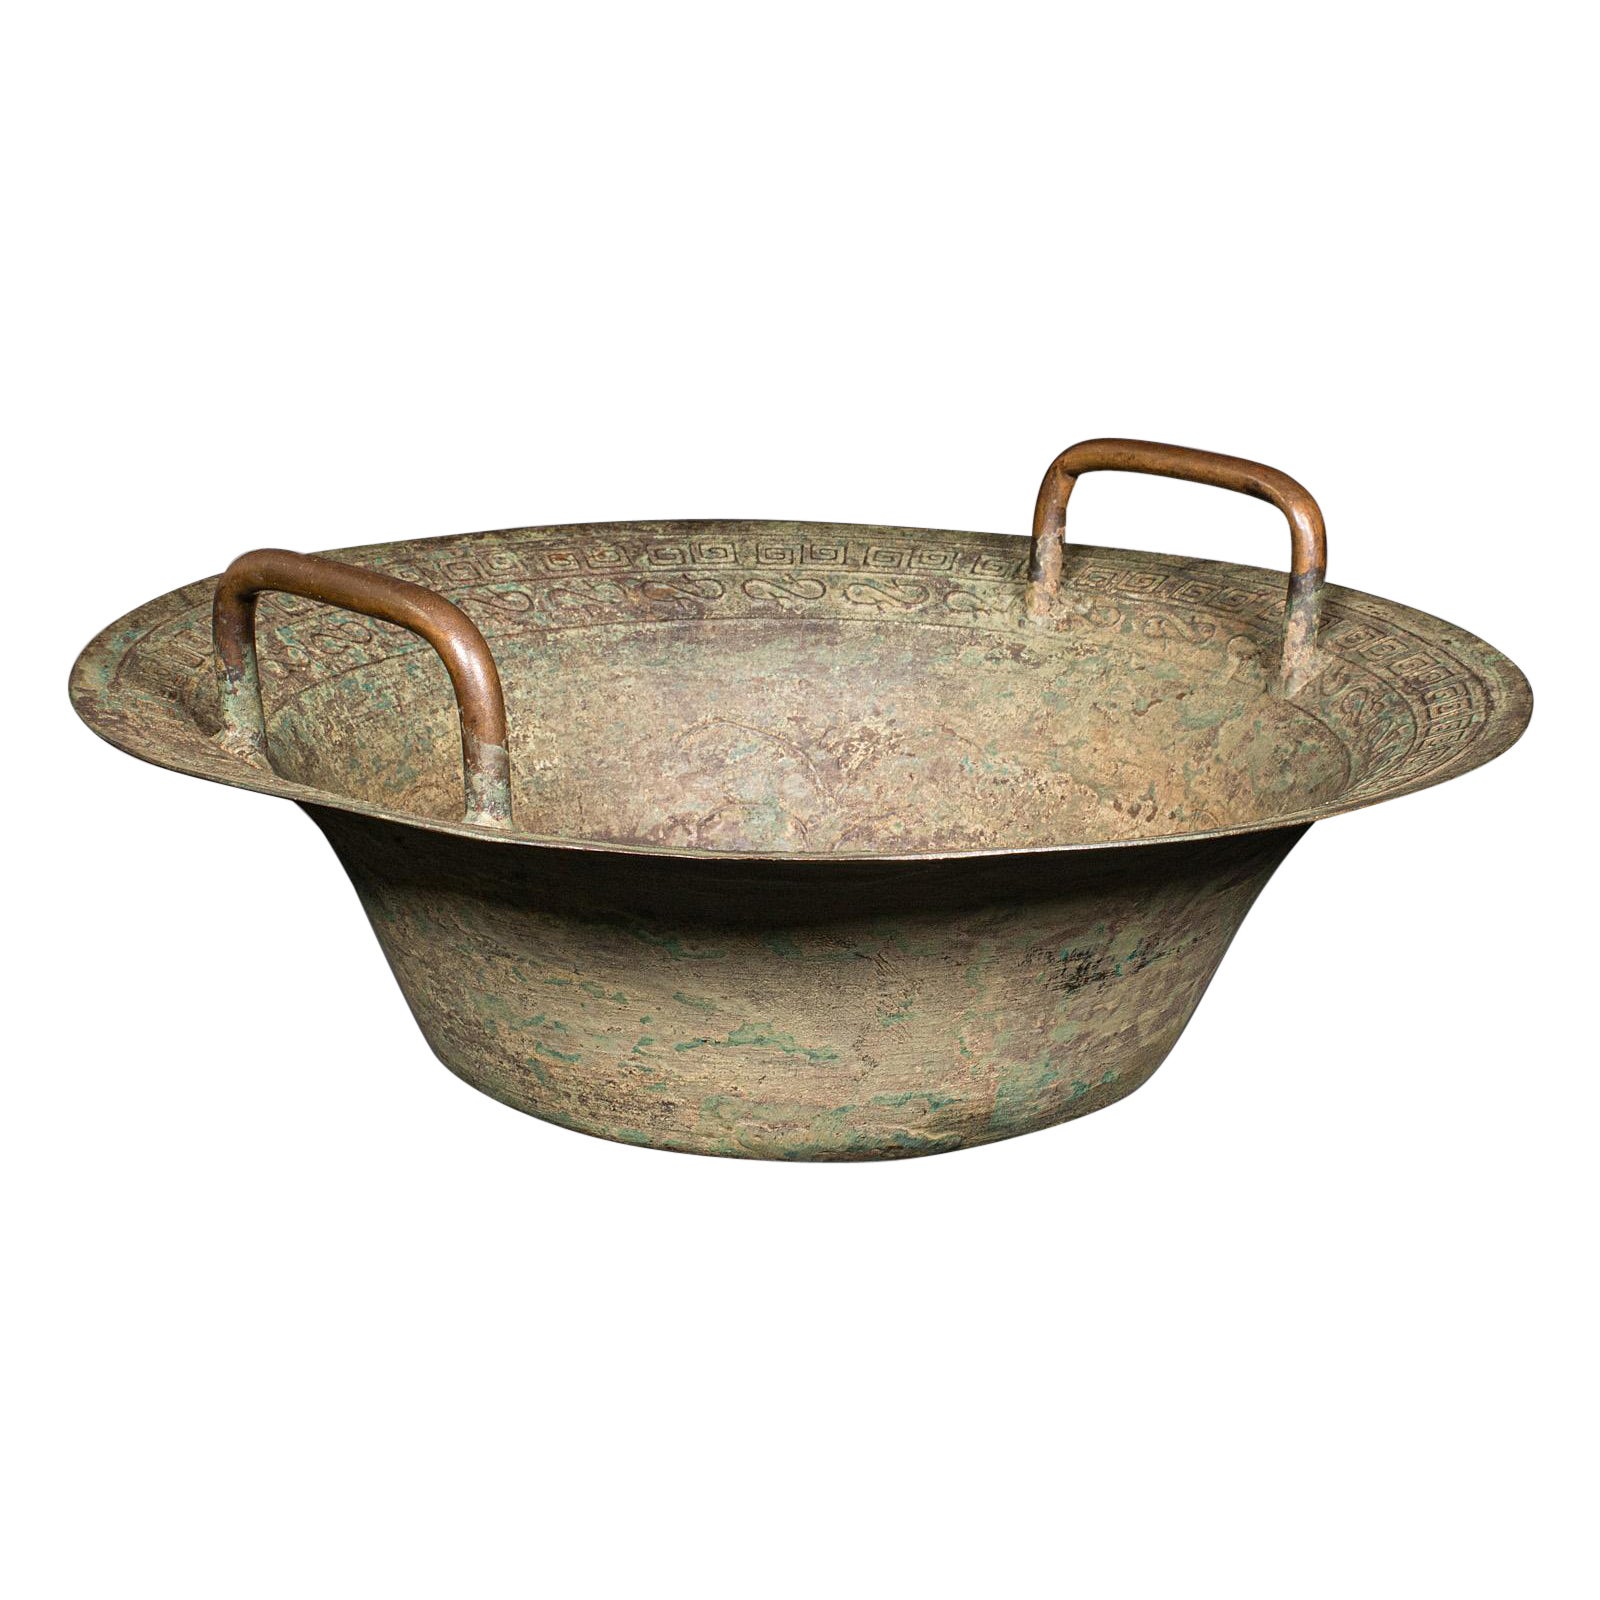 Antique Ceremonial Bowl, Chinese, Patinated Brass, Dish, Qing, Victorian, C.1900